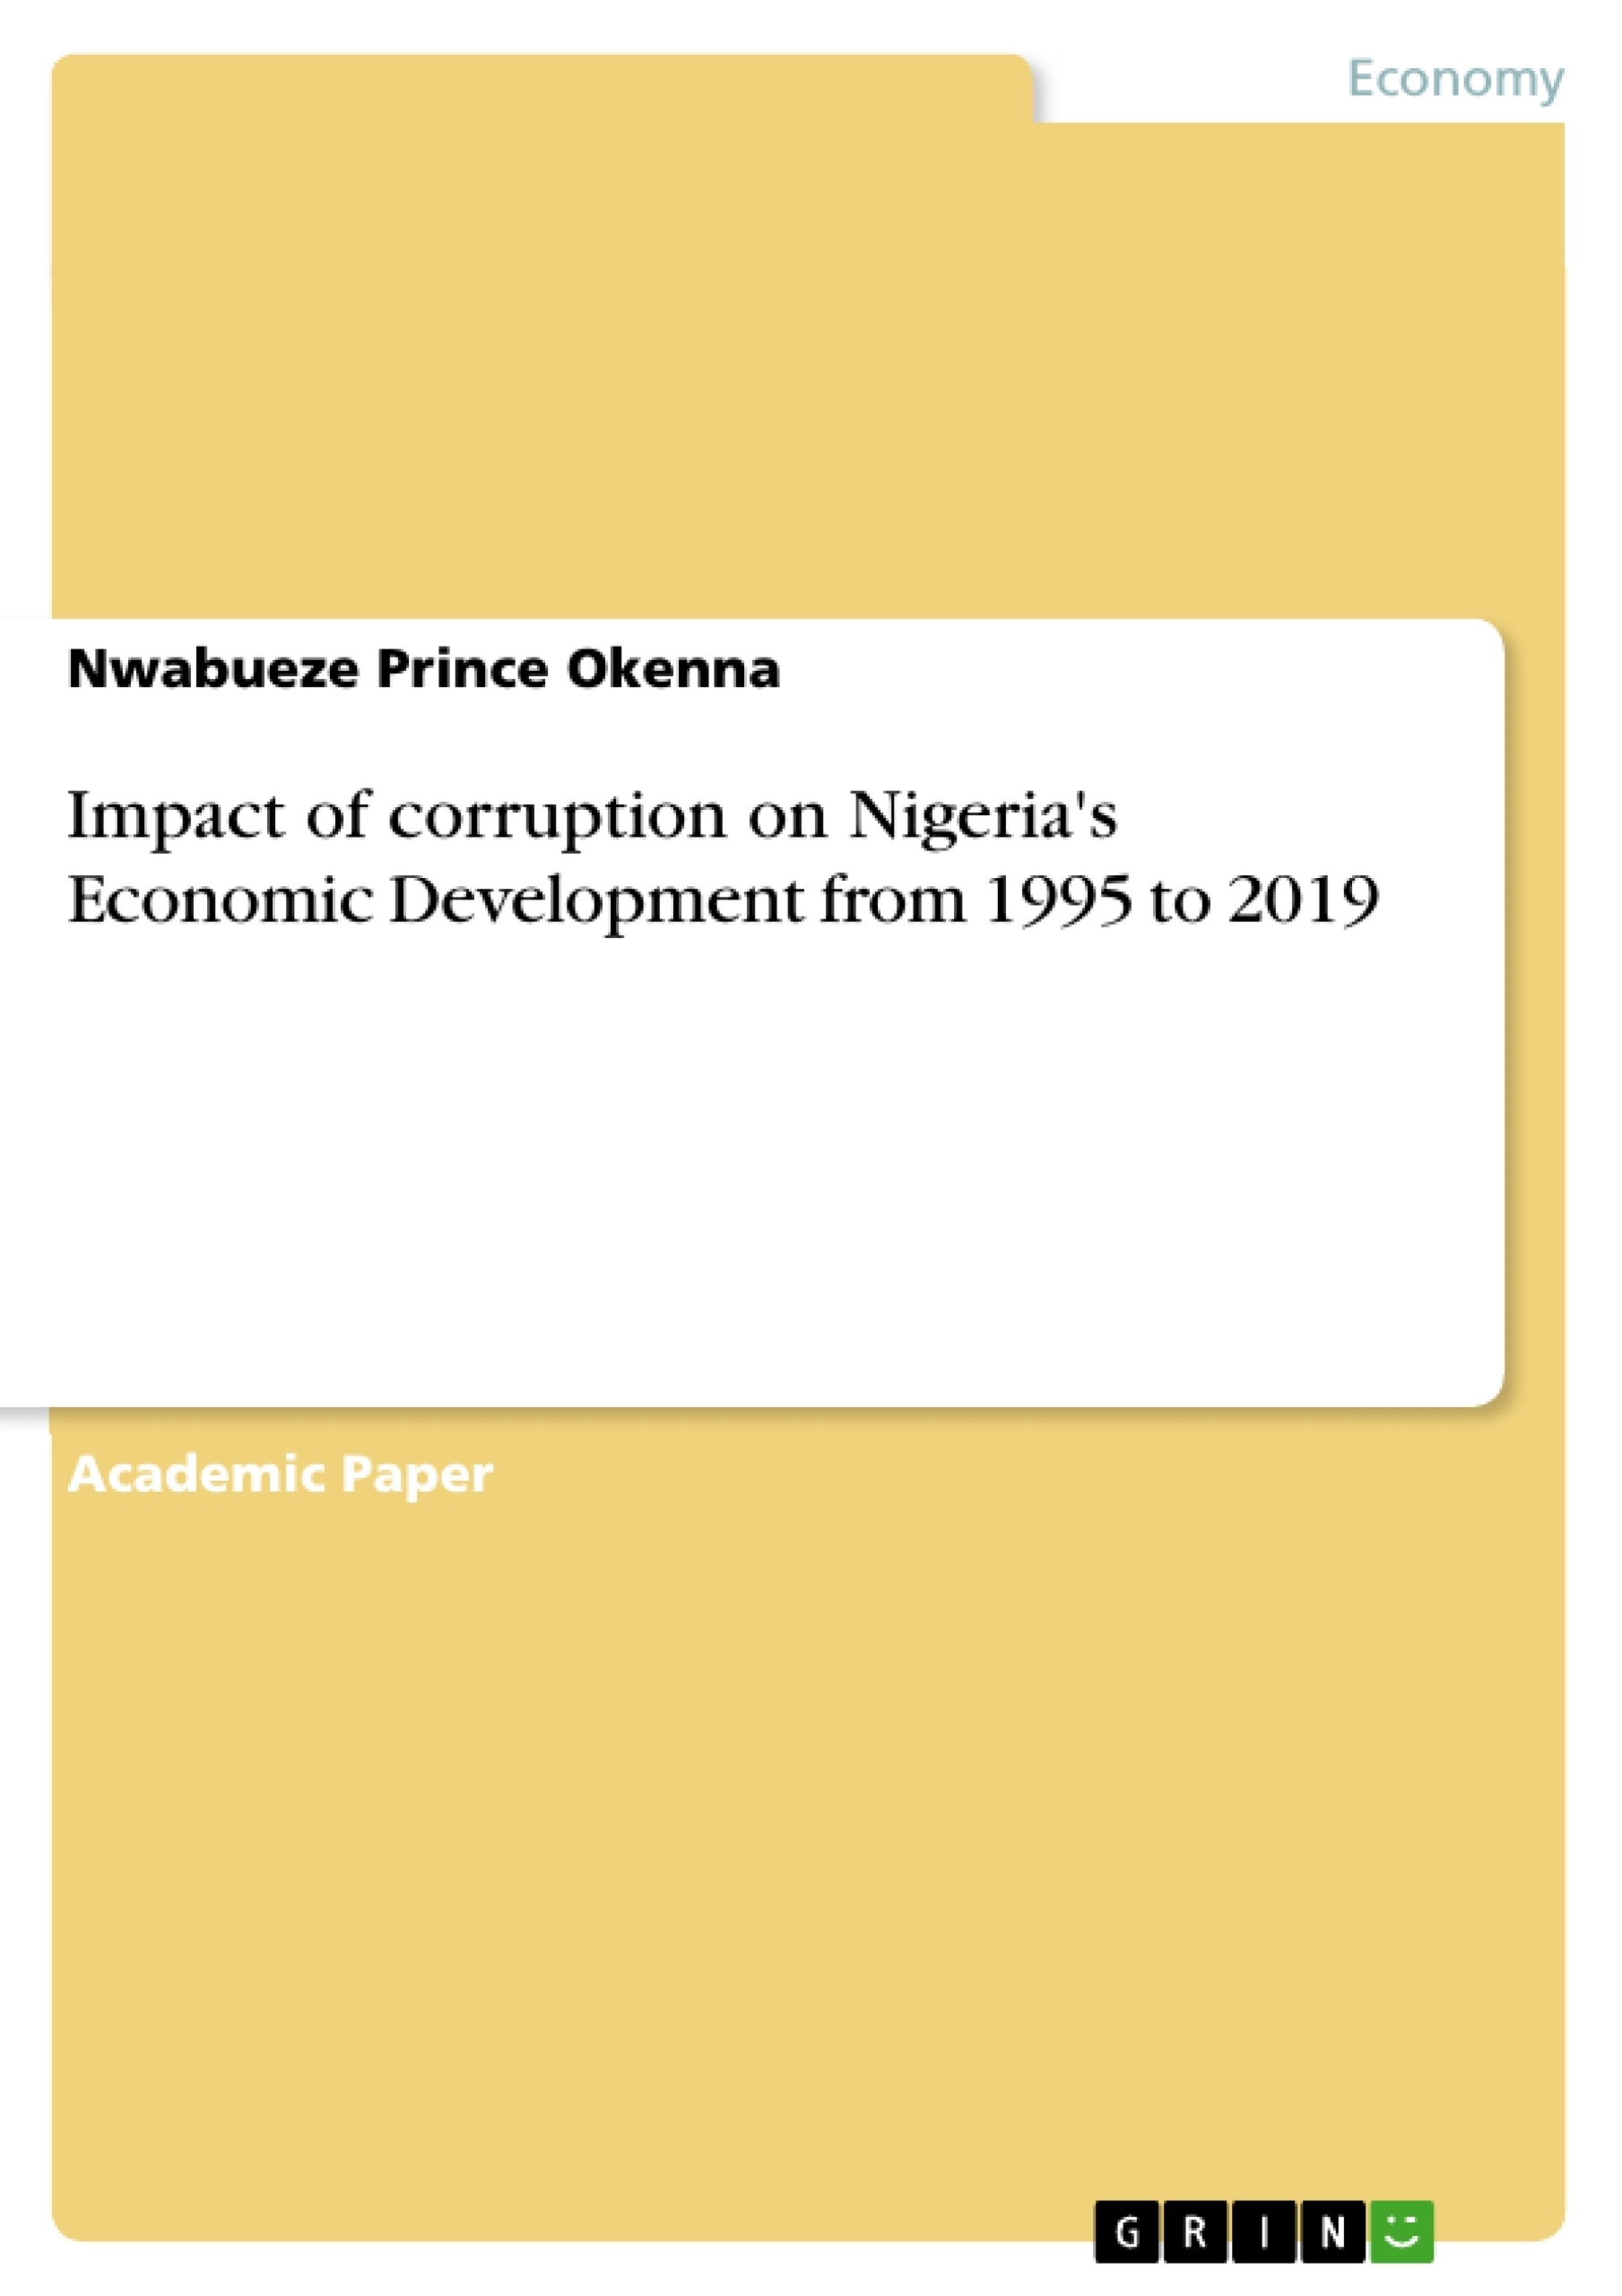 Title: Impact of corruption on Nigeria's Economic Development from 1995 to 2019